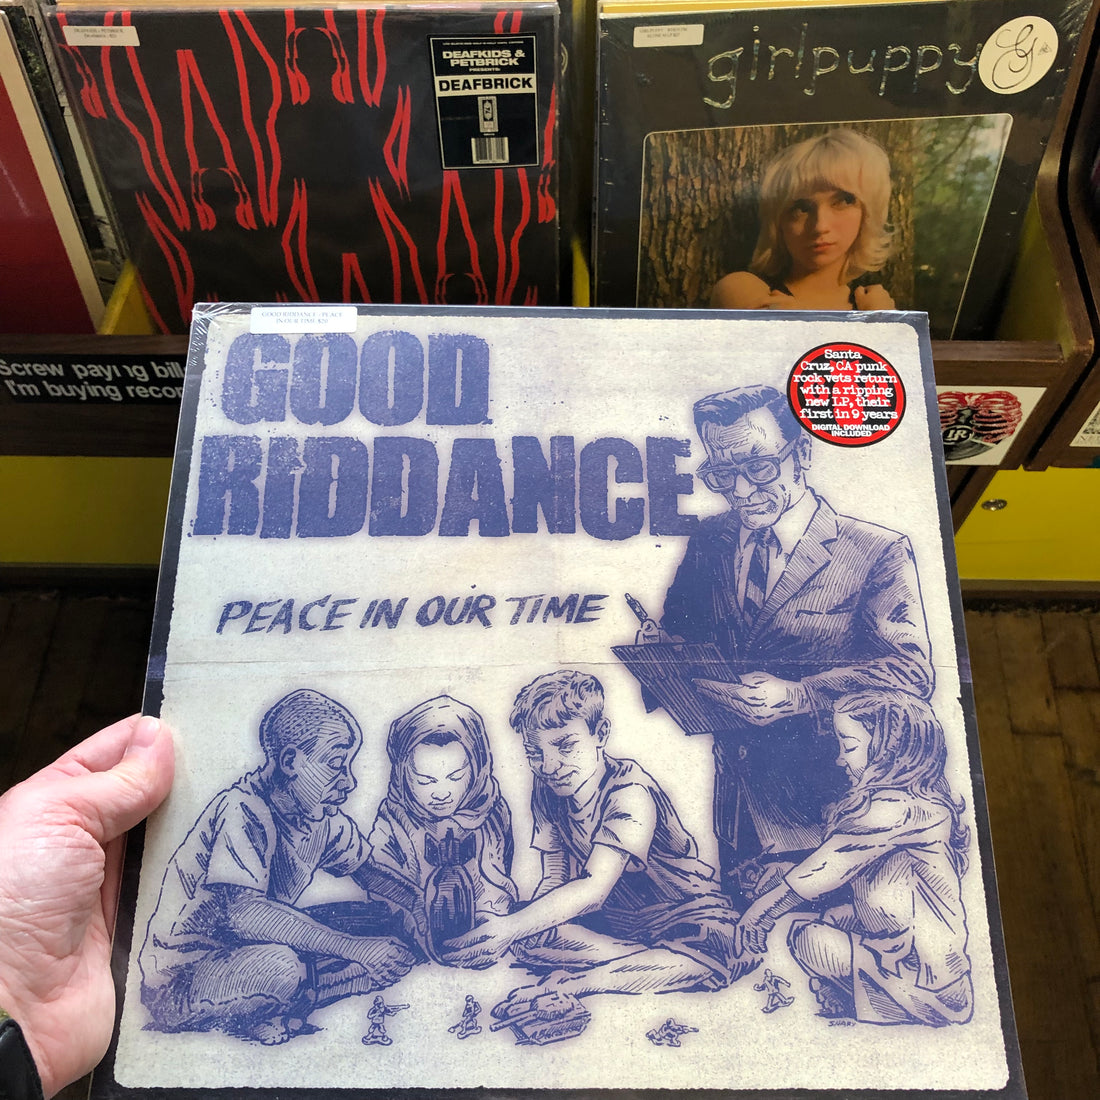 Good Riddance - Peace In Our Time